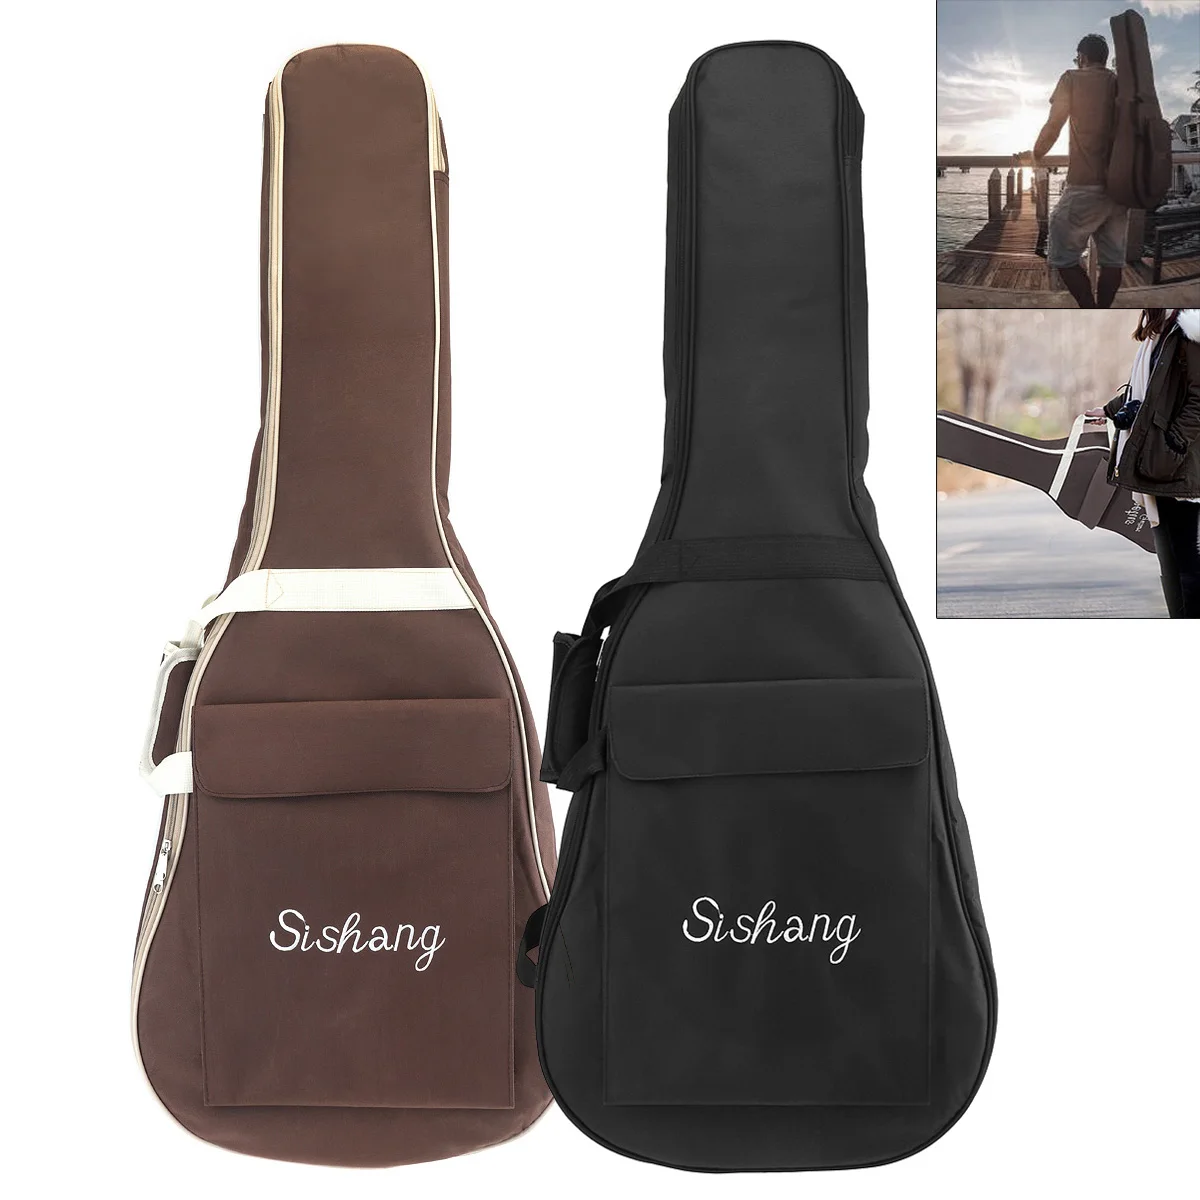 40/41 Inch Oxford Fabric Guitar Case Gig Bags Double Straps Padded 10mm Cotton Soft Waterproof Backpack Black Coffee Optional